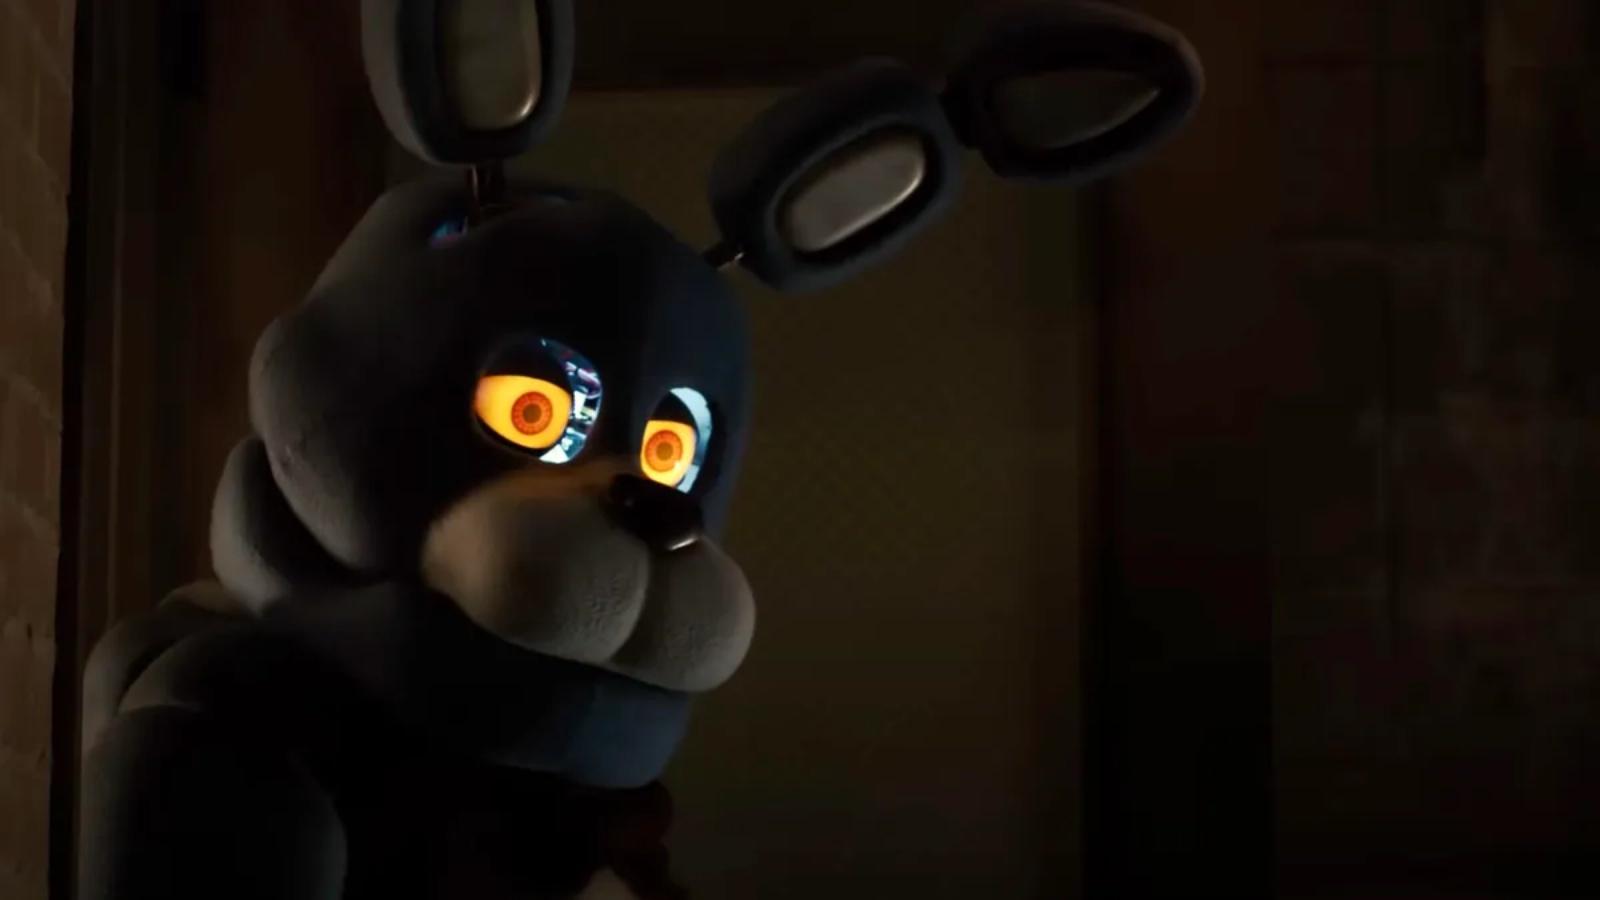 Five Nights at Freddy's Movie Trailer Confirms Cory Kenshin